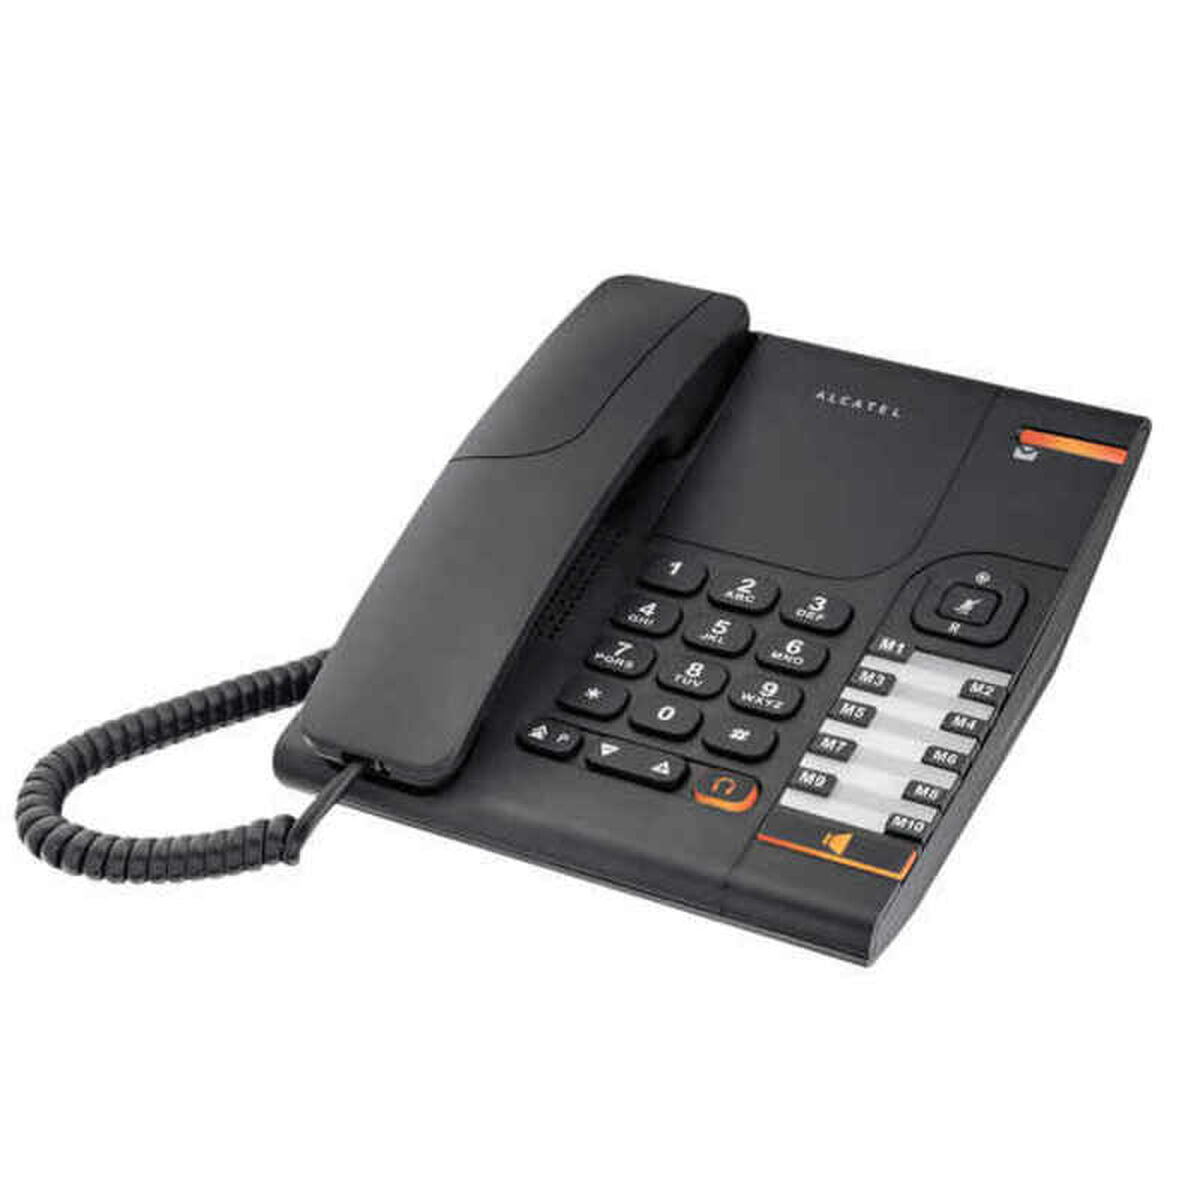 Landline Telephone Alcatel ATL1407518 Black, Alcatel, Electronics, Landline telephones and accessories, landline-telephone-alcatel-atl1407518-black, black friday / cyber monday, Brand_Alcatel, category-reference-2609, category-reference-2617, category-reference-2619, category-reference-t-18372, category-reference-t-18382, category-reference-t-19653, Condition_NEW, office, Price_20 - 50, telephones & tablets, Teleworking, RiotNook